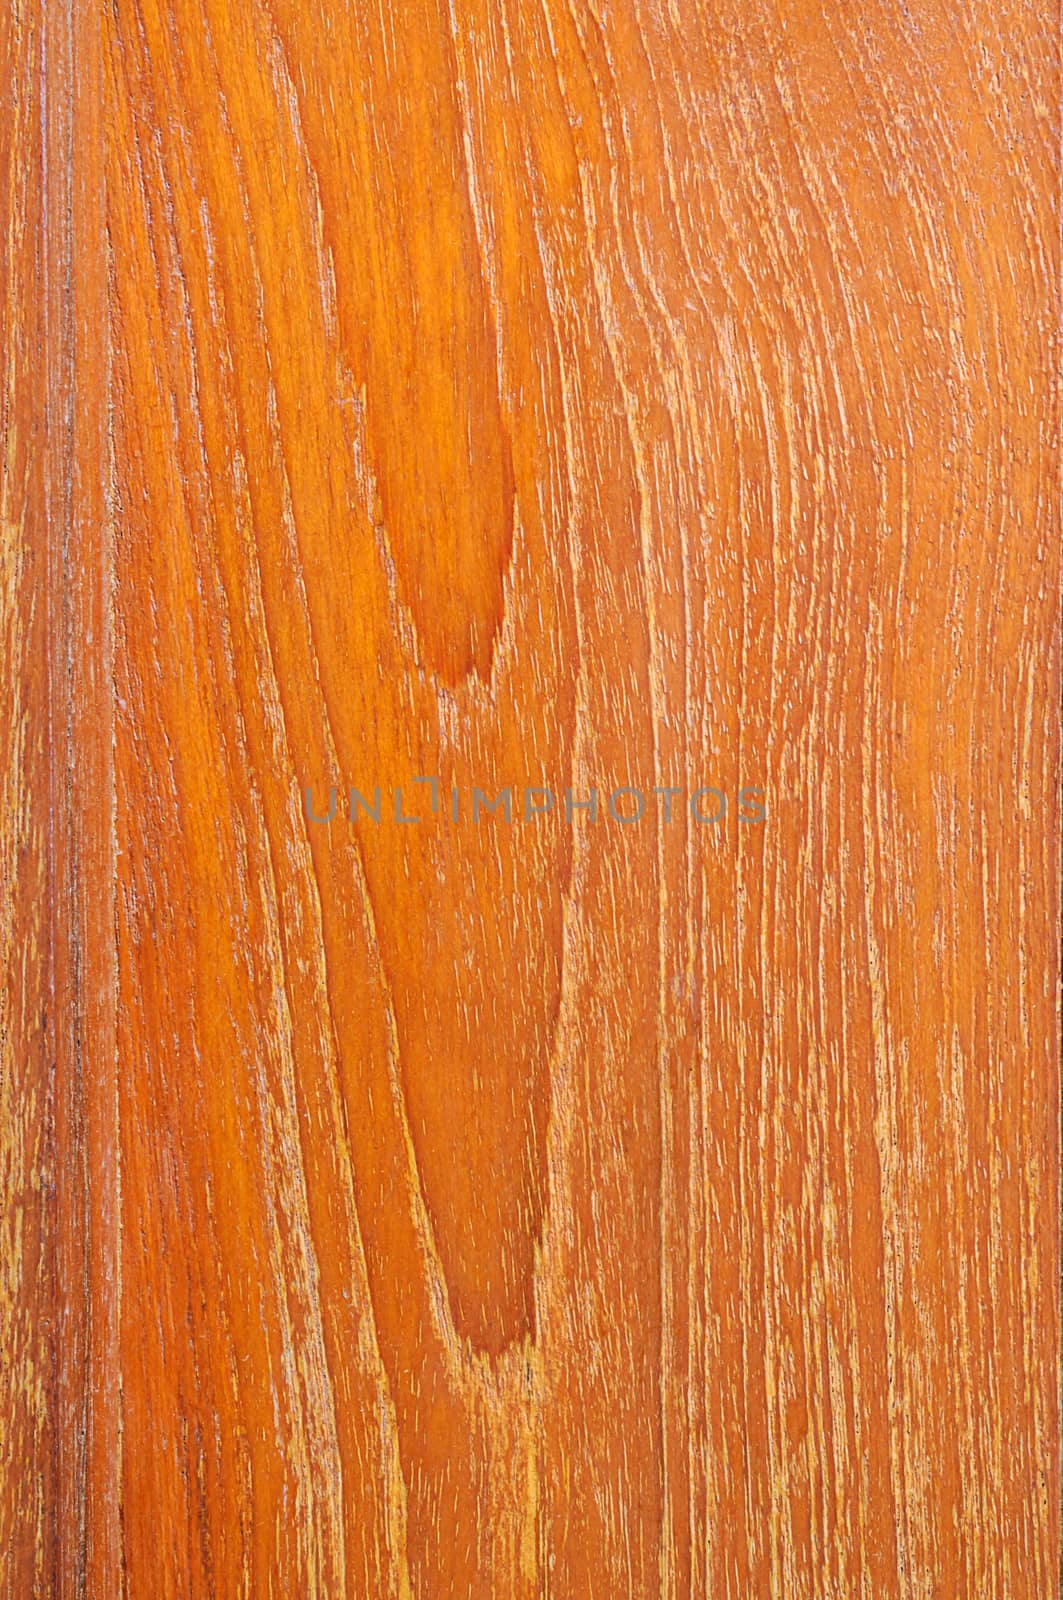 Wooden planks texture.  by NuwatPhoto